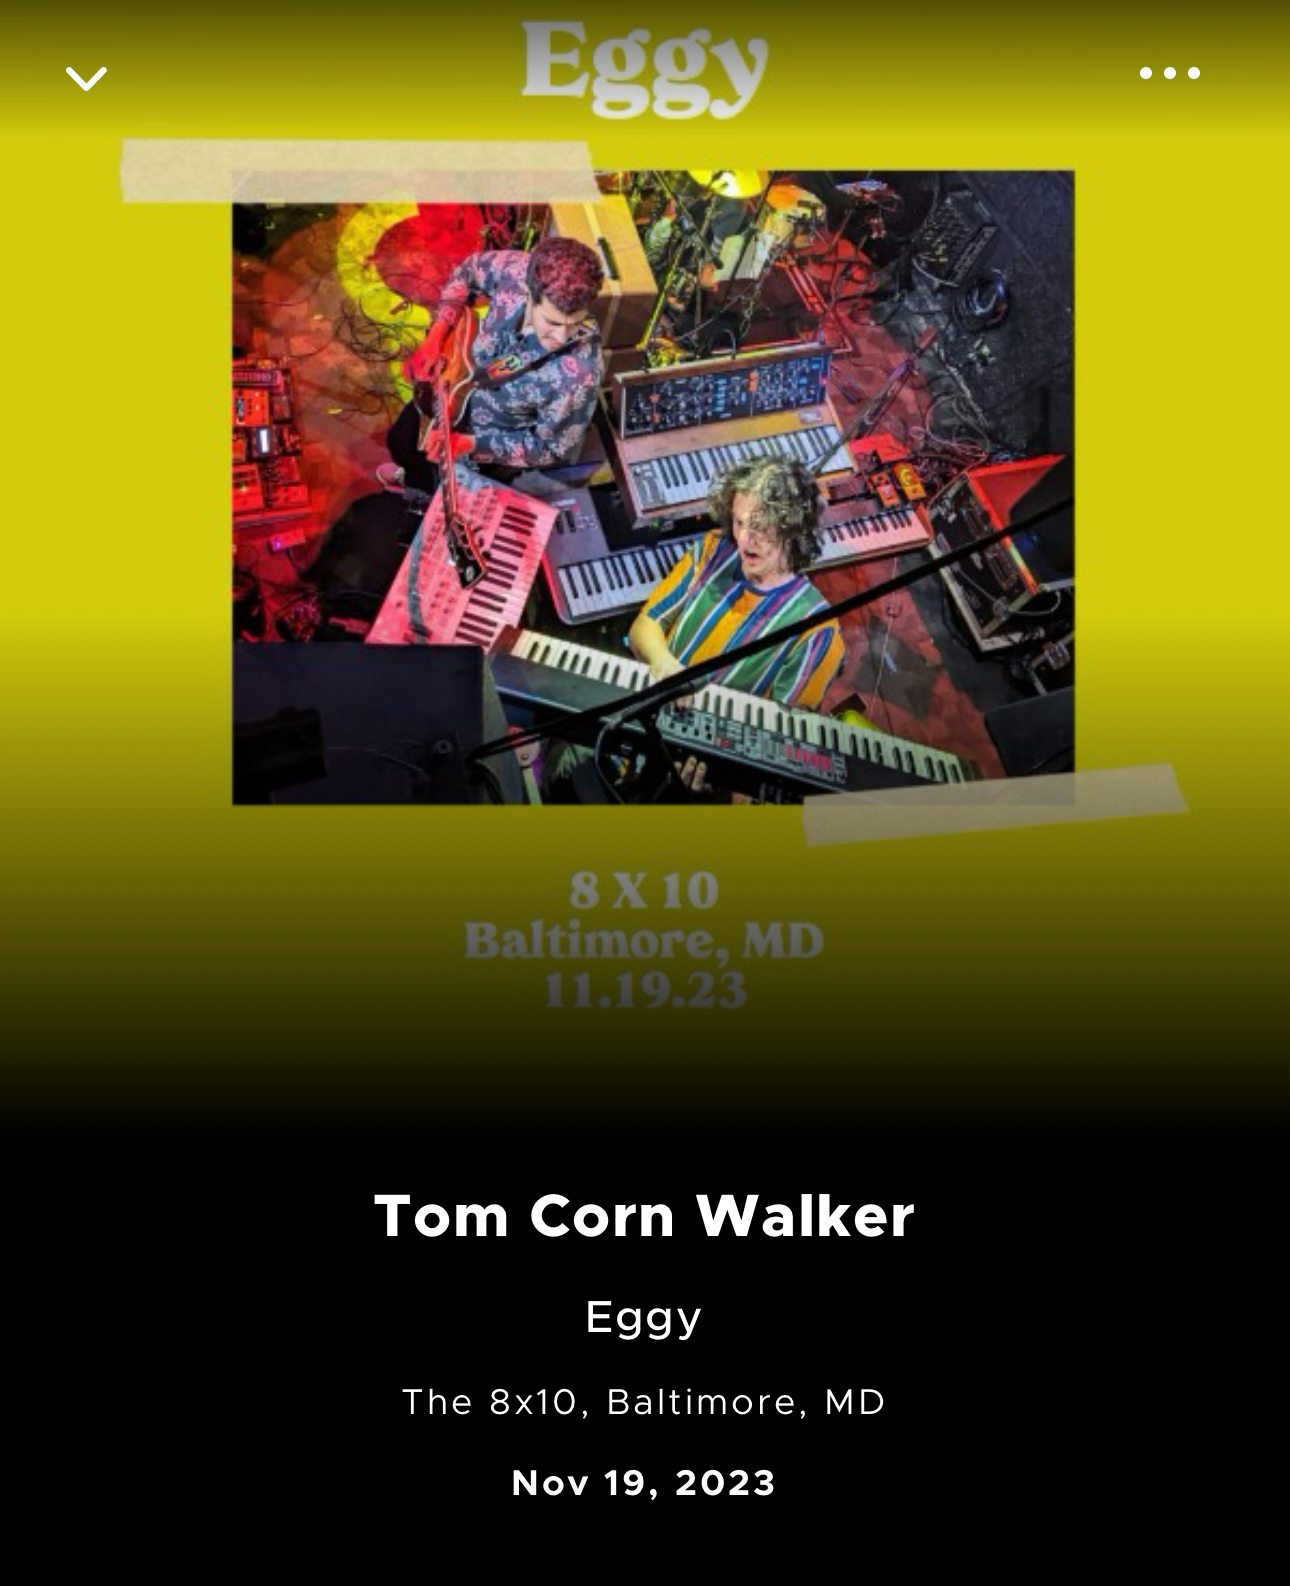 Event promotion image featuring two musicians surrounded by keyboards and synthesizers, with the band name “Eggy” at the top. Text on the image indicates artist “Tom Corn Walker” performing at “The 8x10, Baltimore, MD”